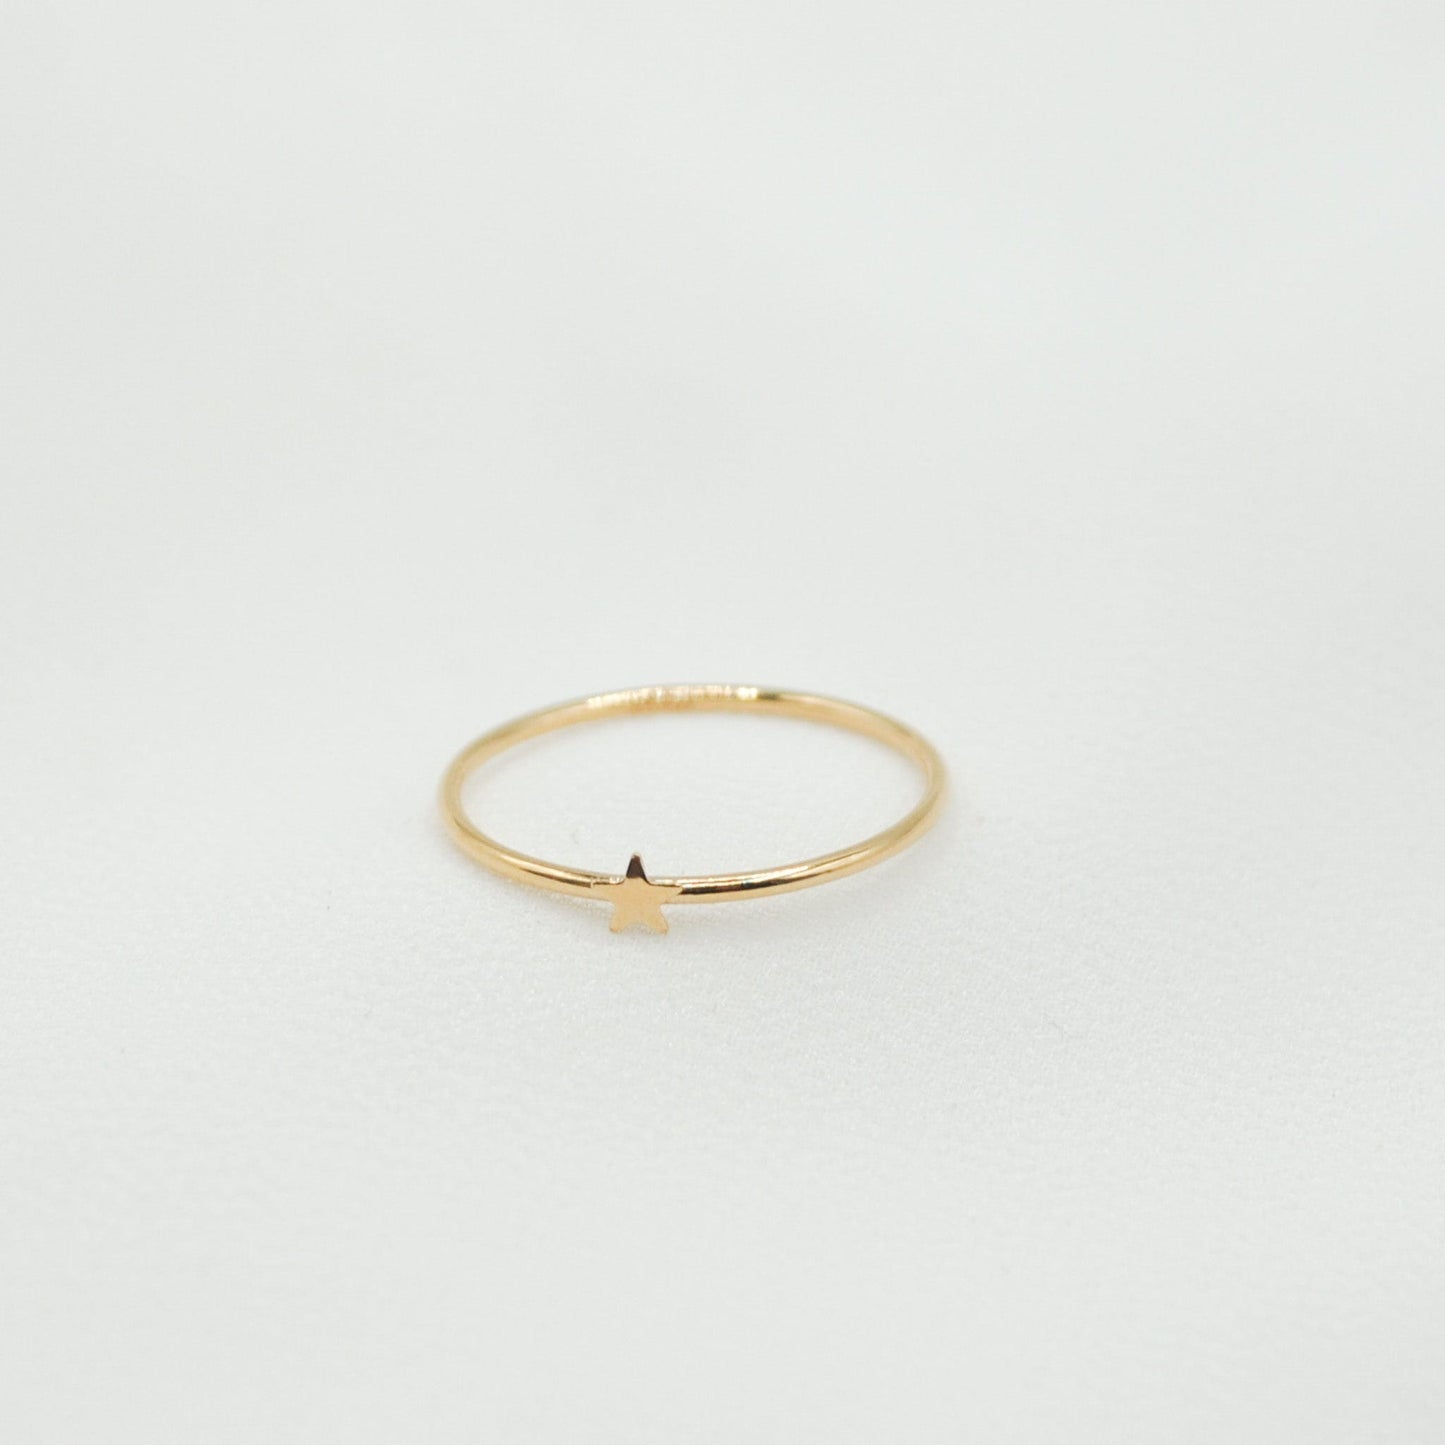 Gold Filled Star Ring